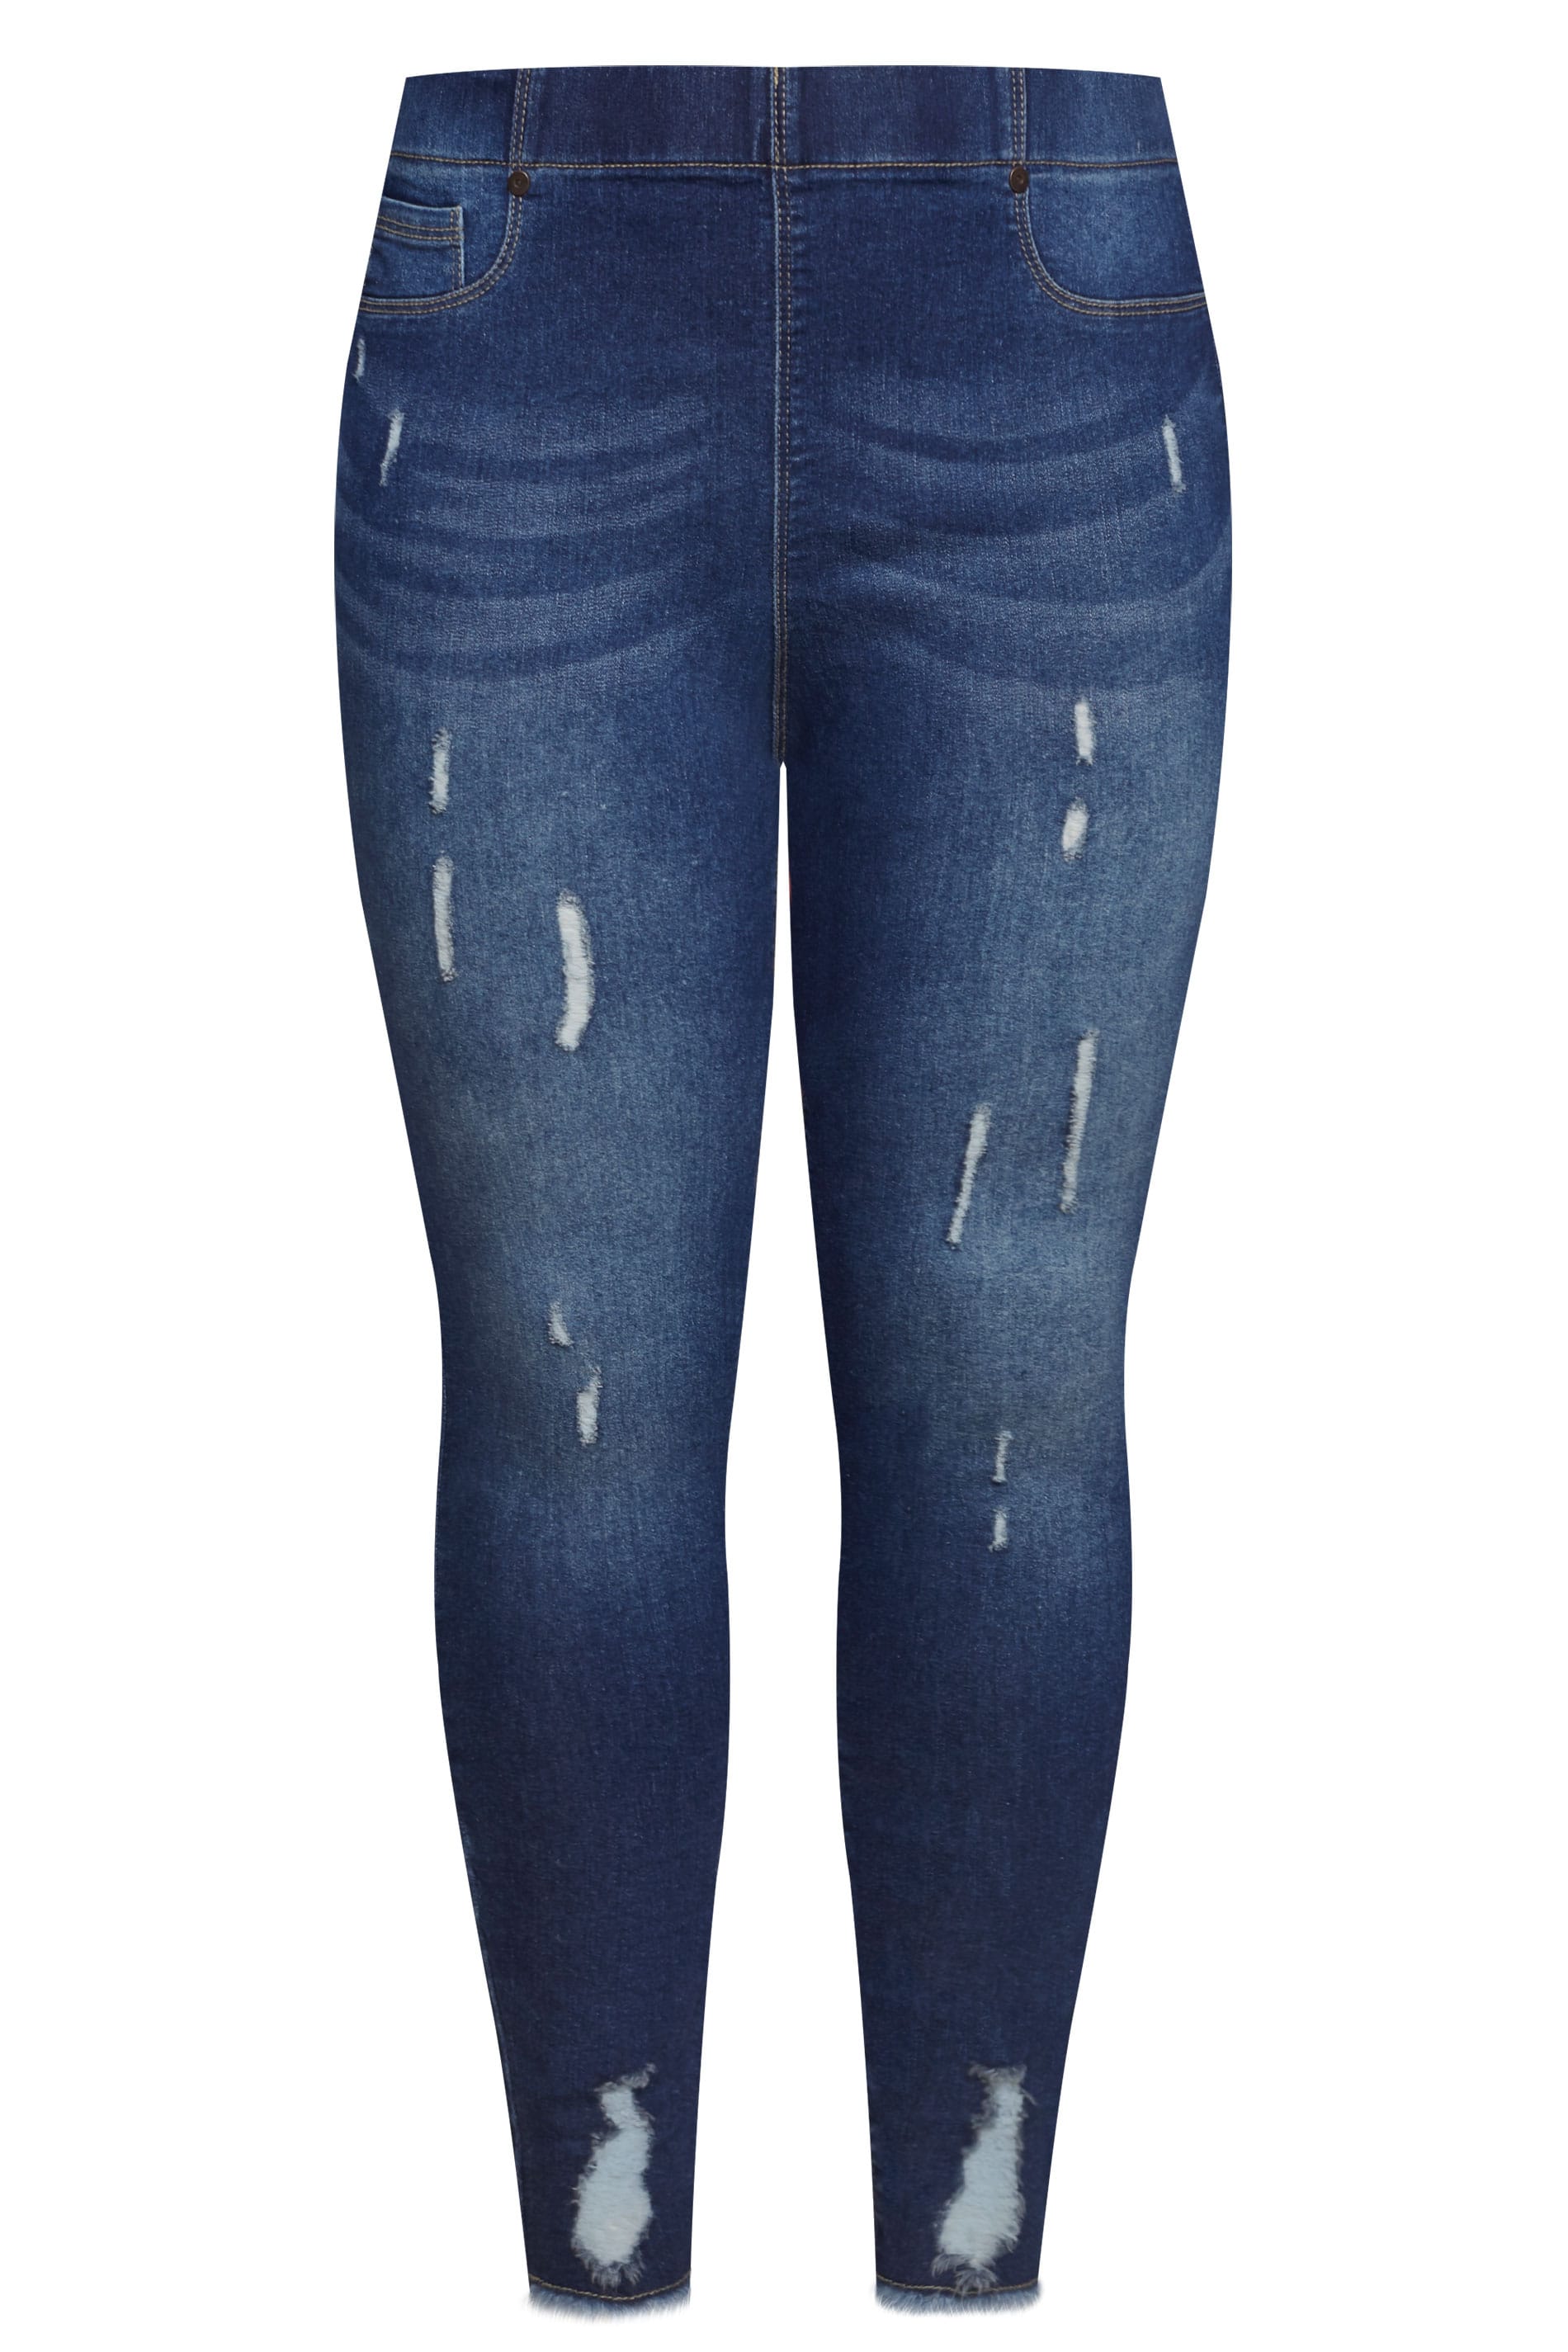 https://cdn.yoursclothing.com/Images/ProductImages/Indigo_Distressed_JENNY_Jeggings_142260_3bca.jpg